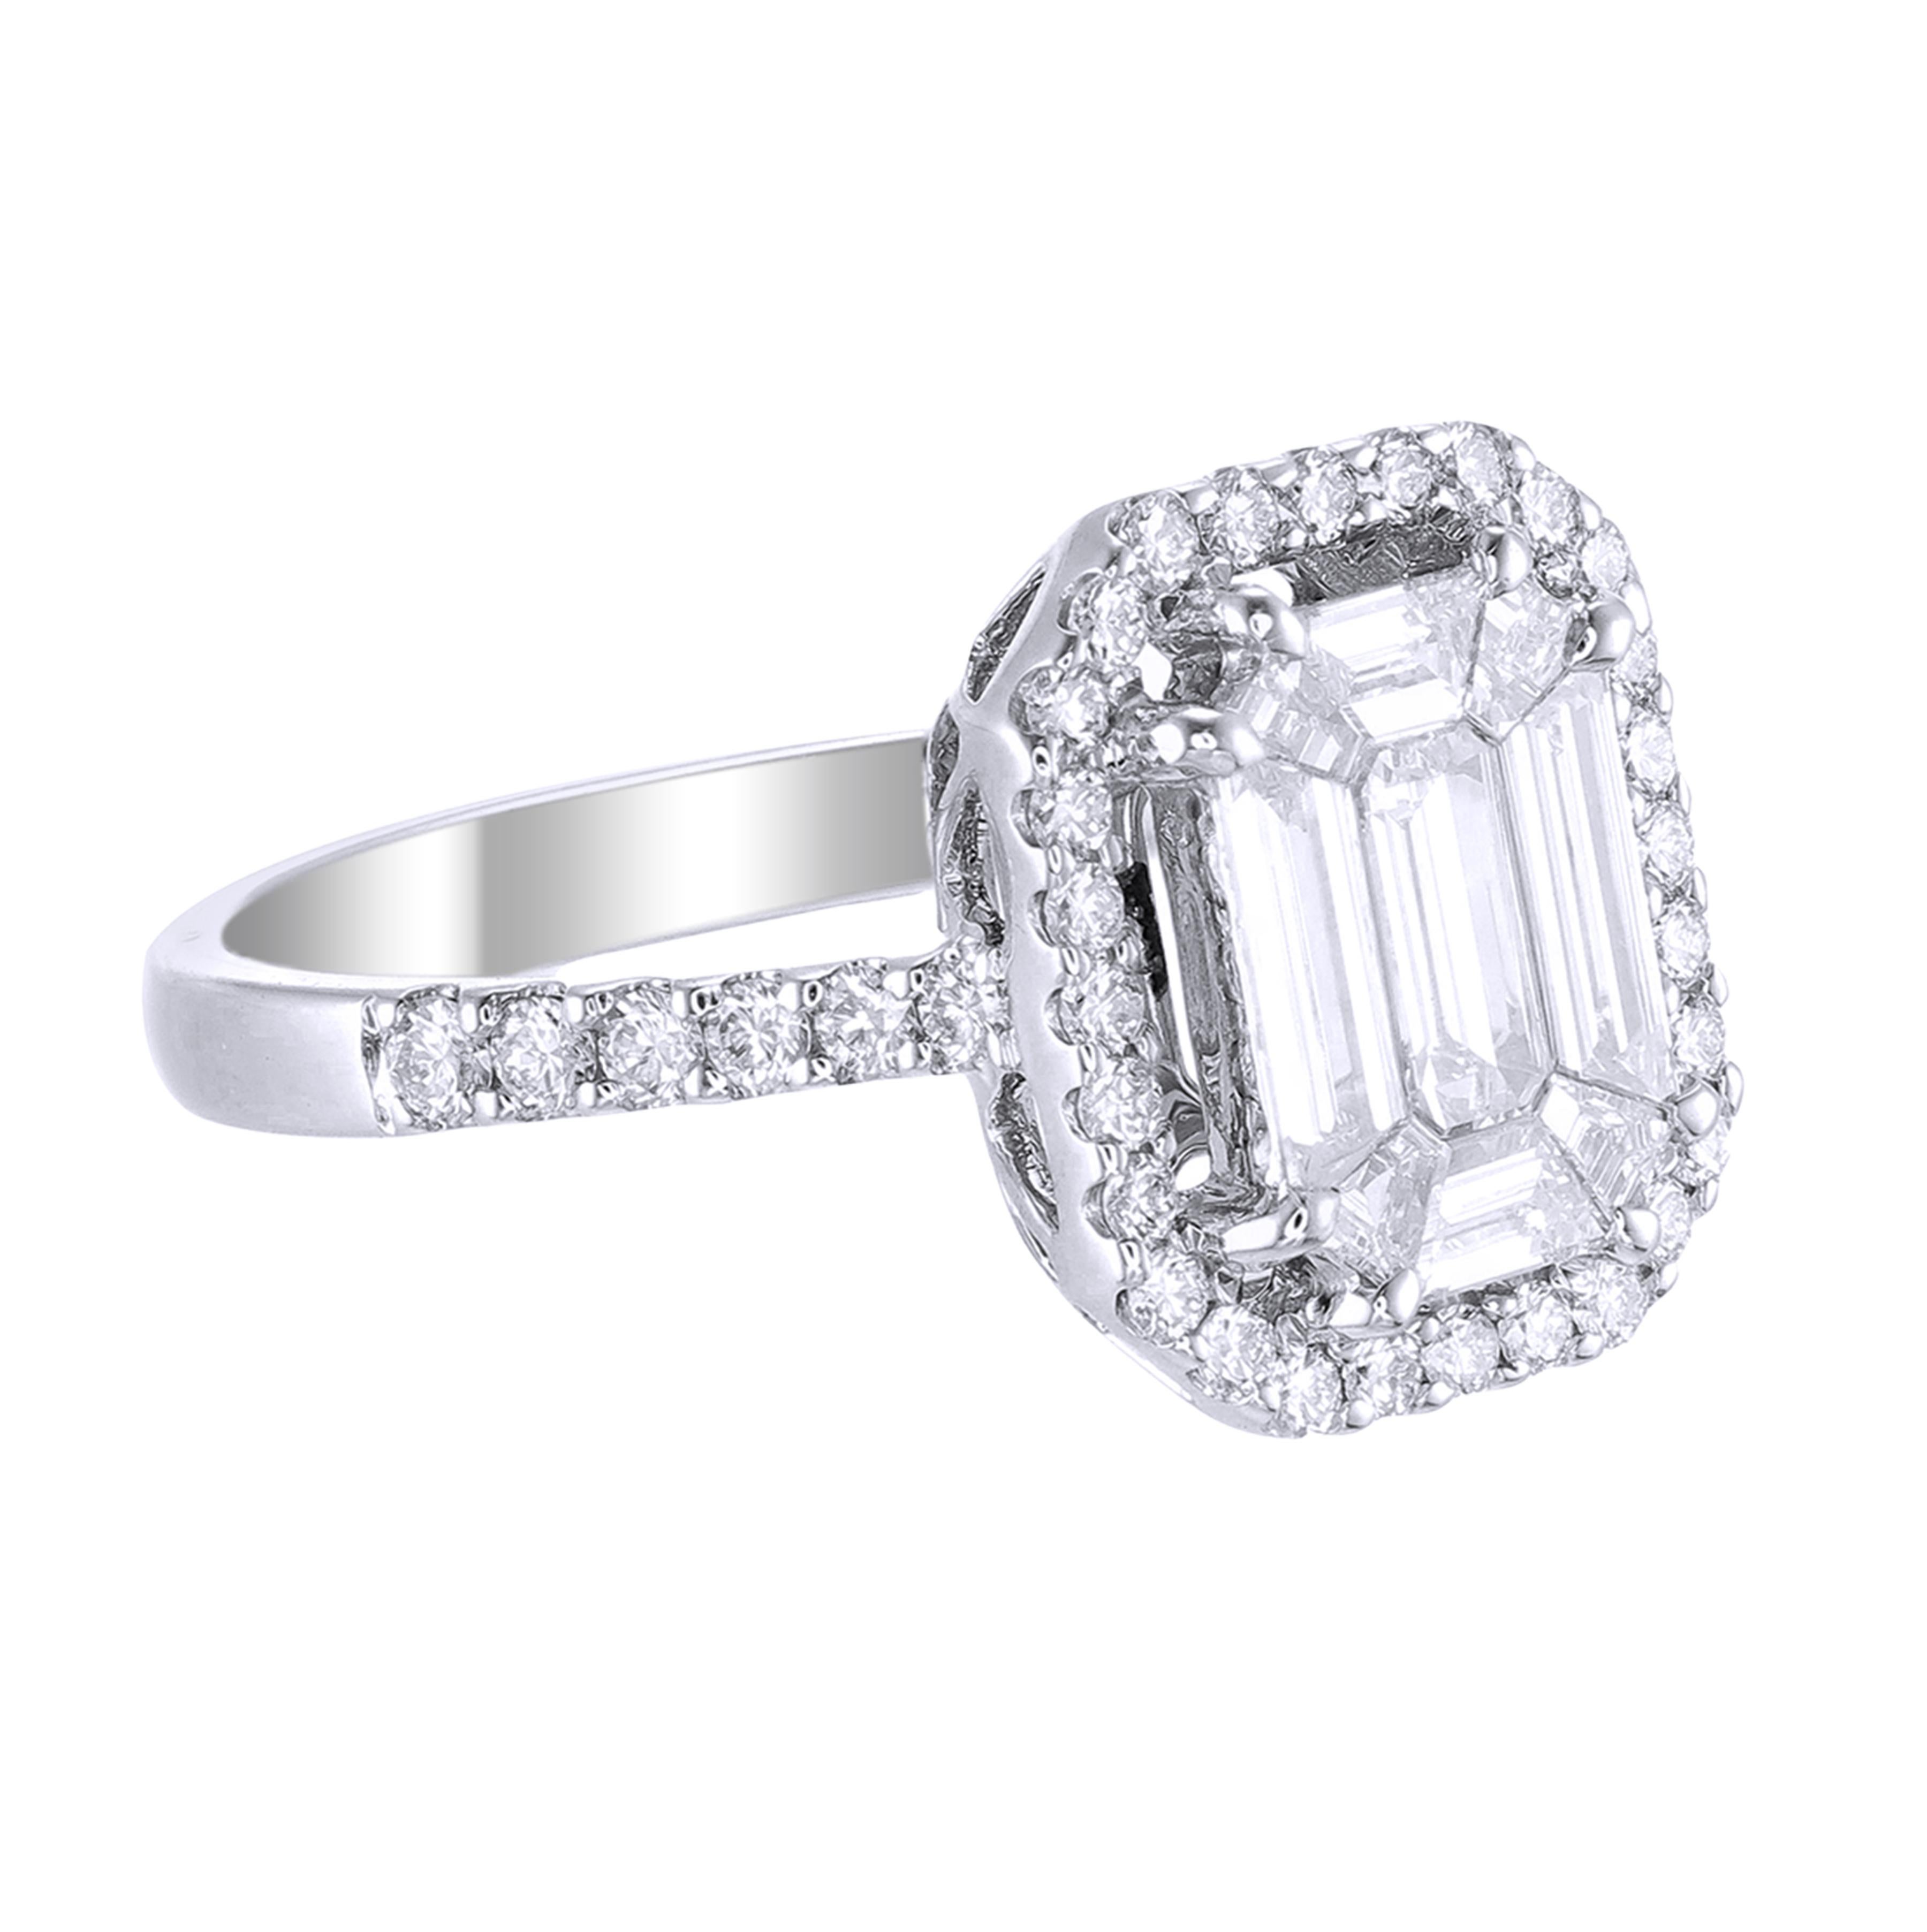 This diamond ring has a Emerald shape Illusion (Pie Cut) to create the look of a 2.50 to 3 carat single Emerald cut stone surrounded beautifully with brilliant round diamonds, Handcrafted in 18 kt white gold.

Our diamonds are graded as G-H color